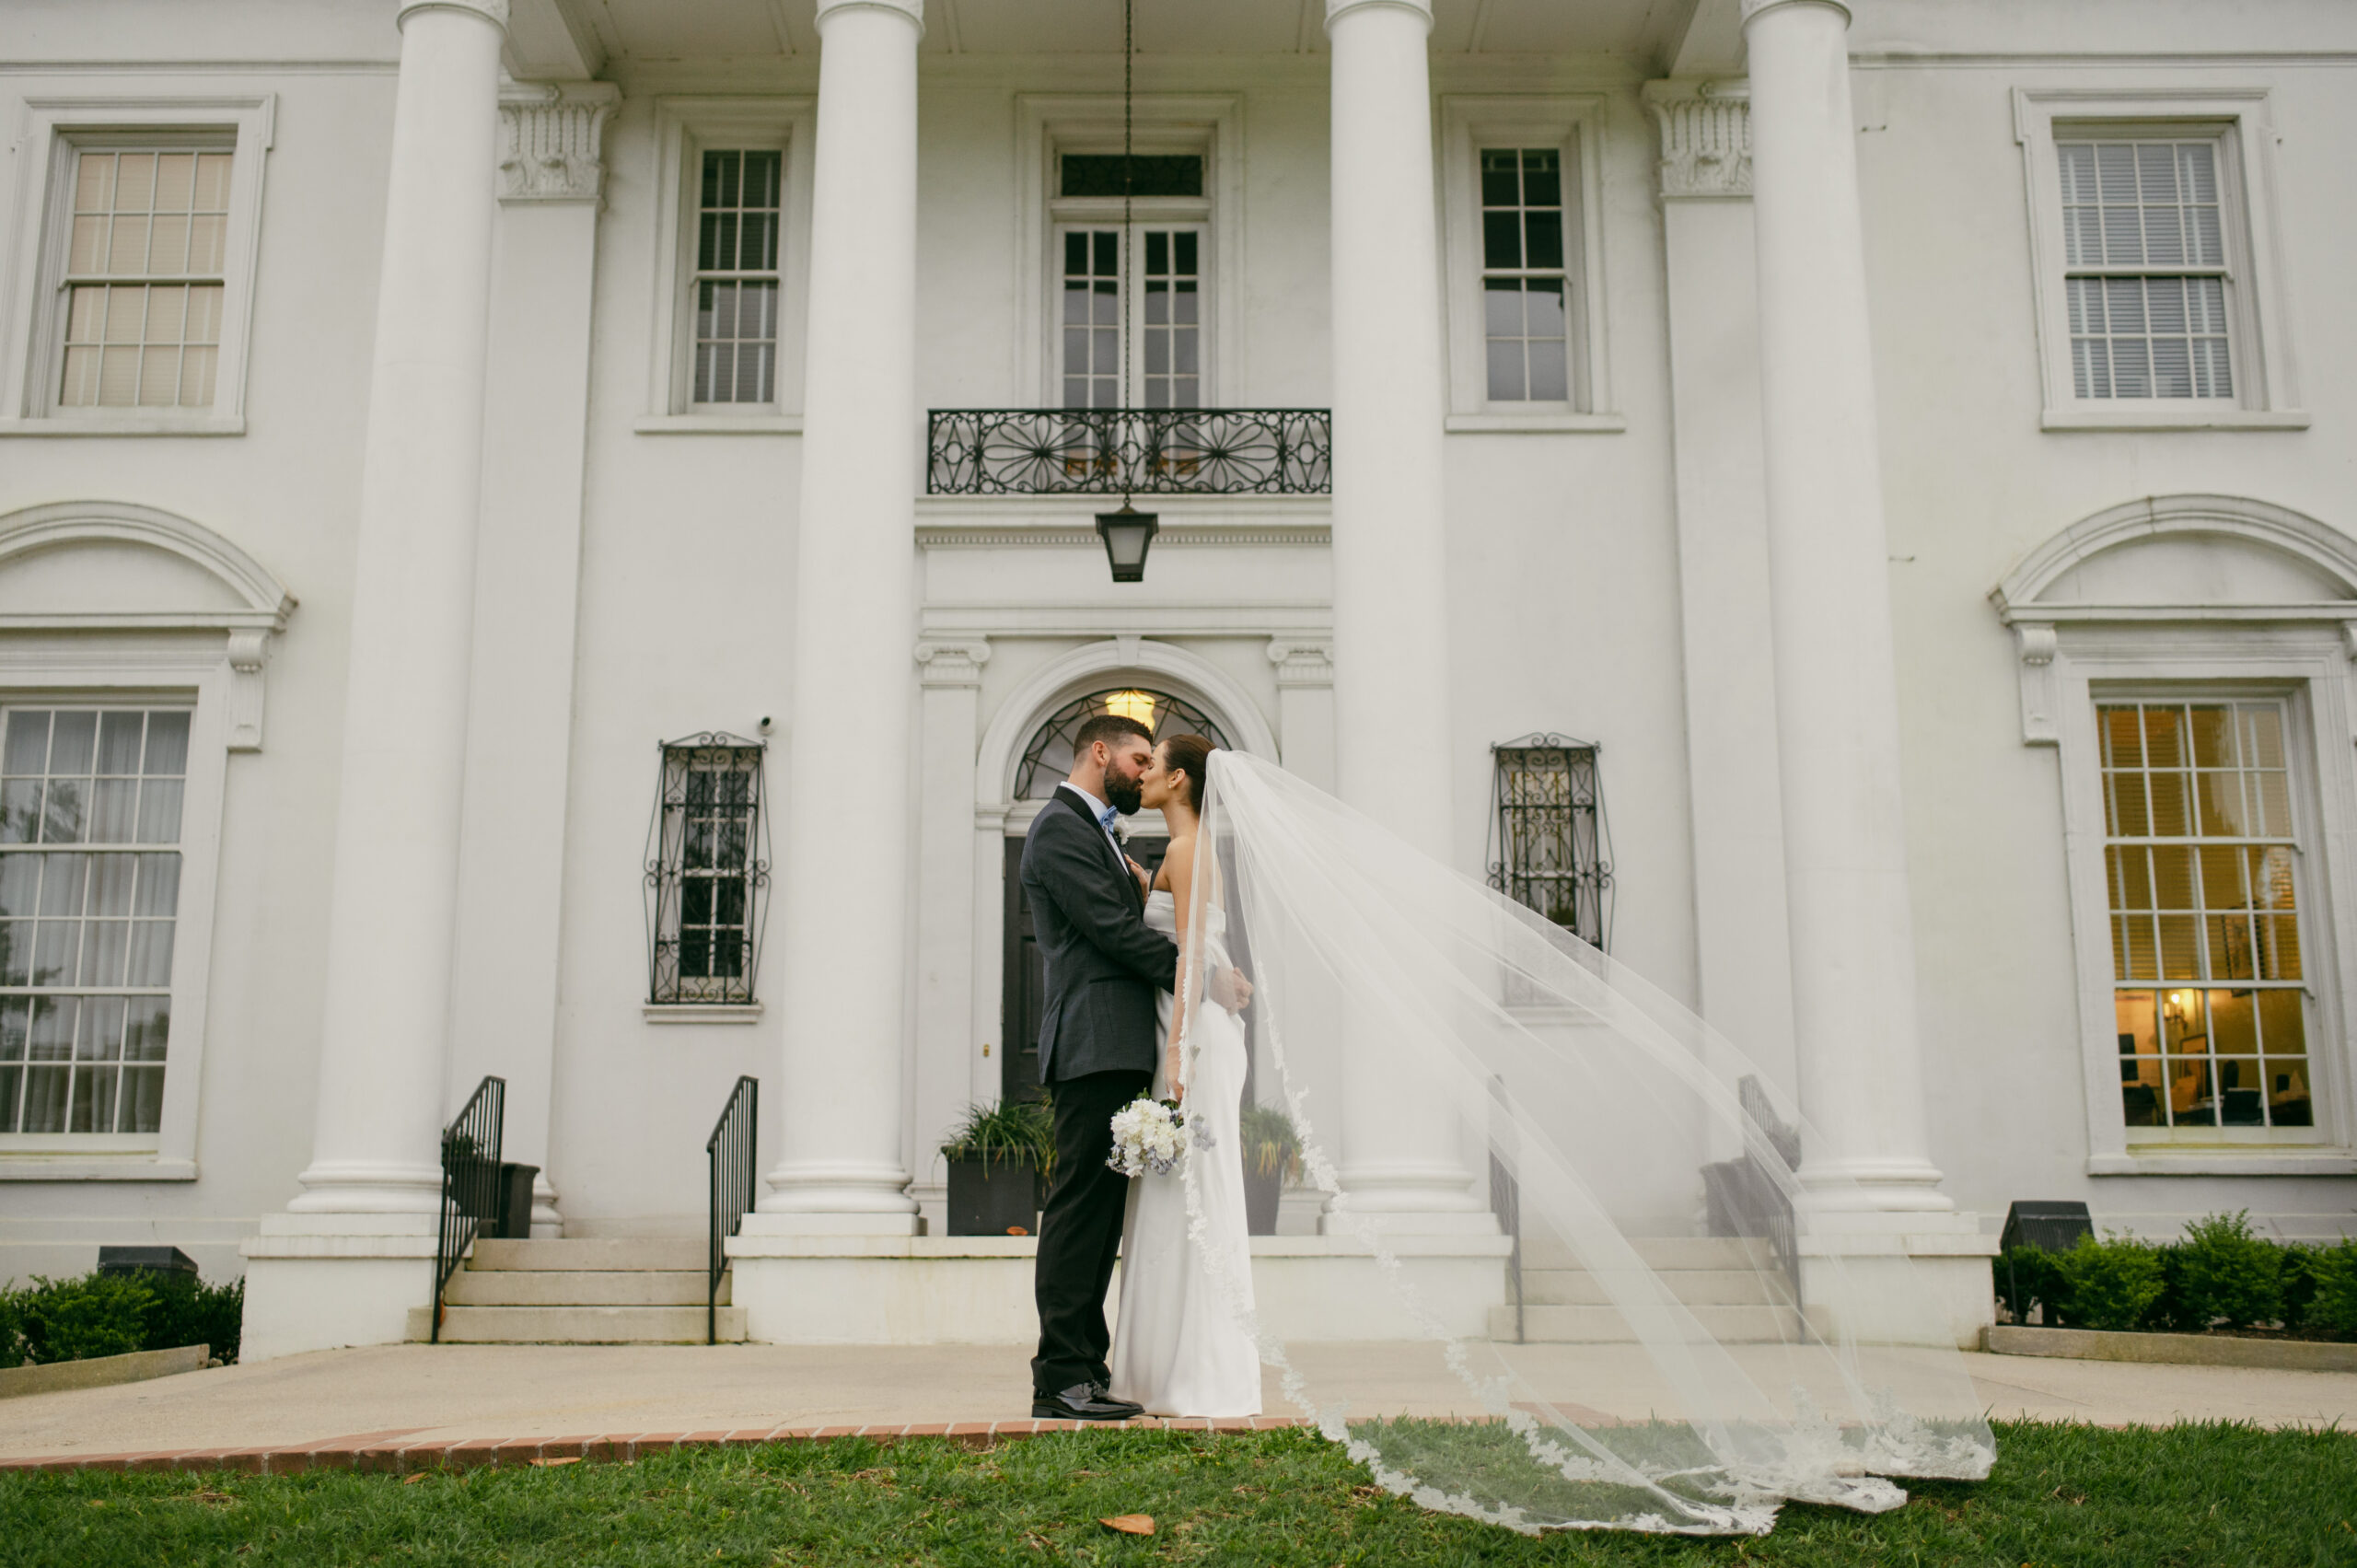 A bride and groom in front of the Old Governor's mansion as her veil blows in the wind.